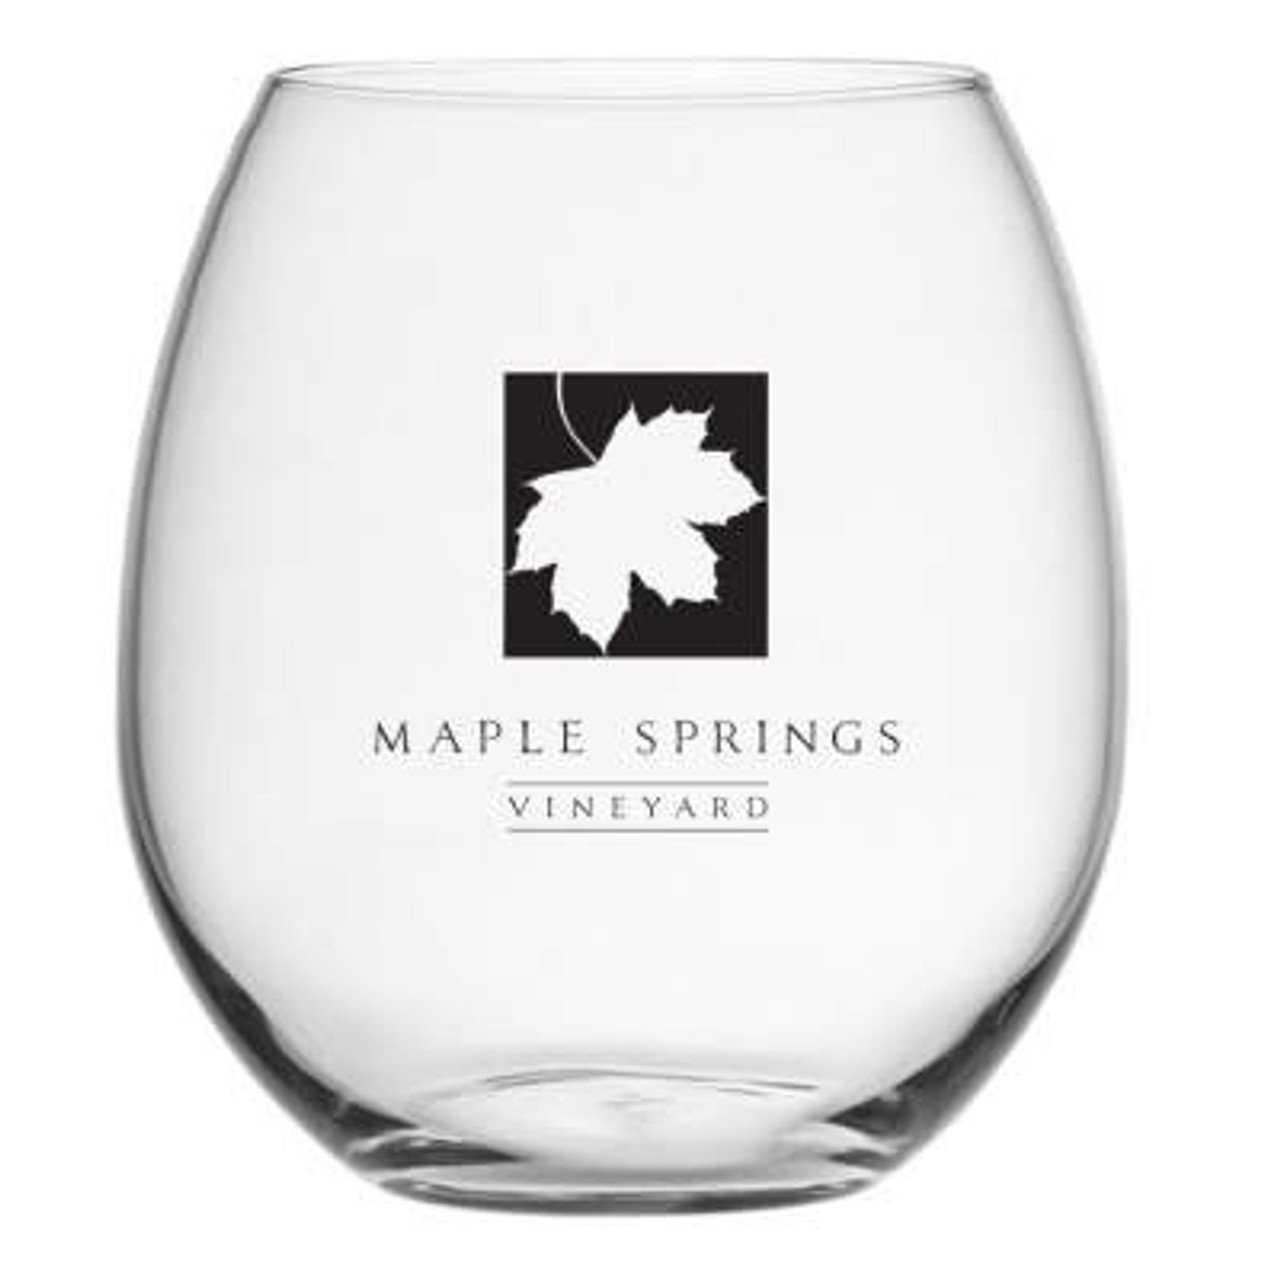 https://cdn11.bigcommerce.com/s-unfit5x/images/stencil/1280x1280/products/2710/5938/acrylic-stemless-wine-glass-with-custom-imprint__67010.1520954851.jpg?c=2